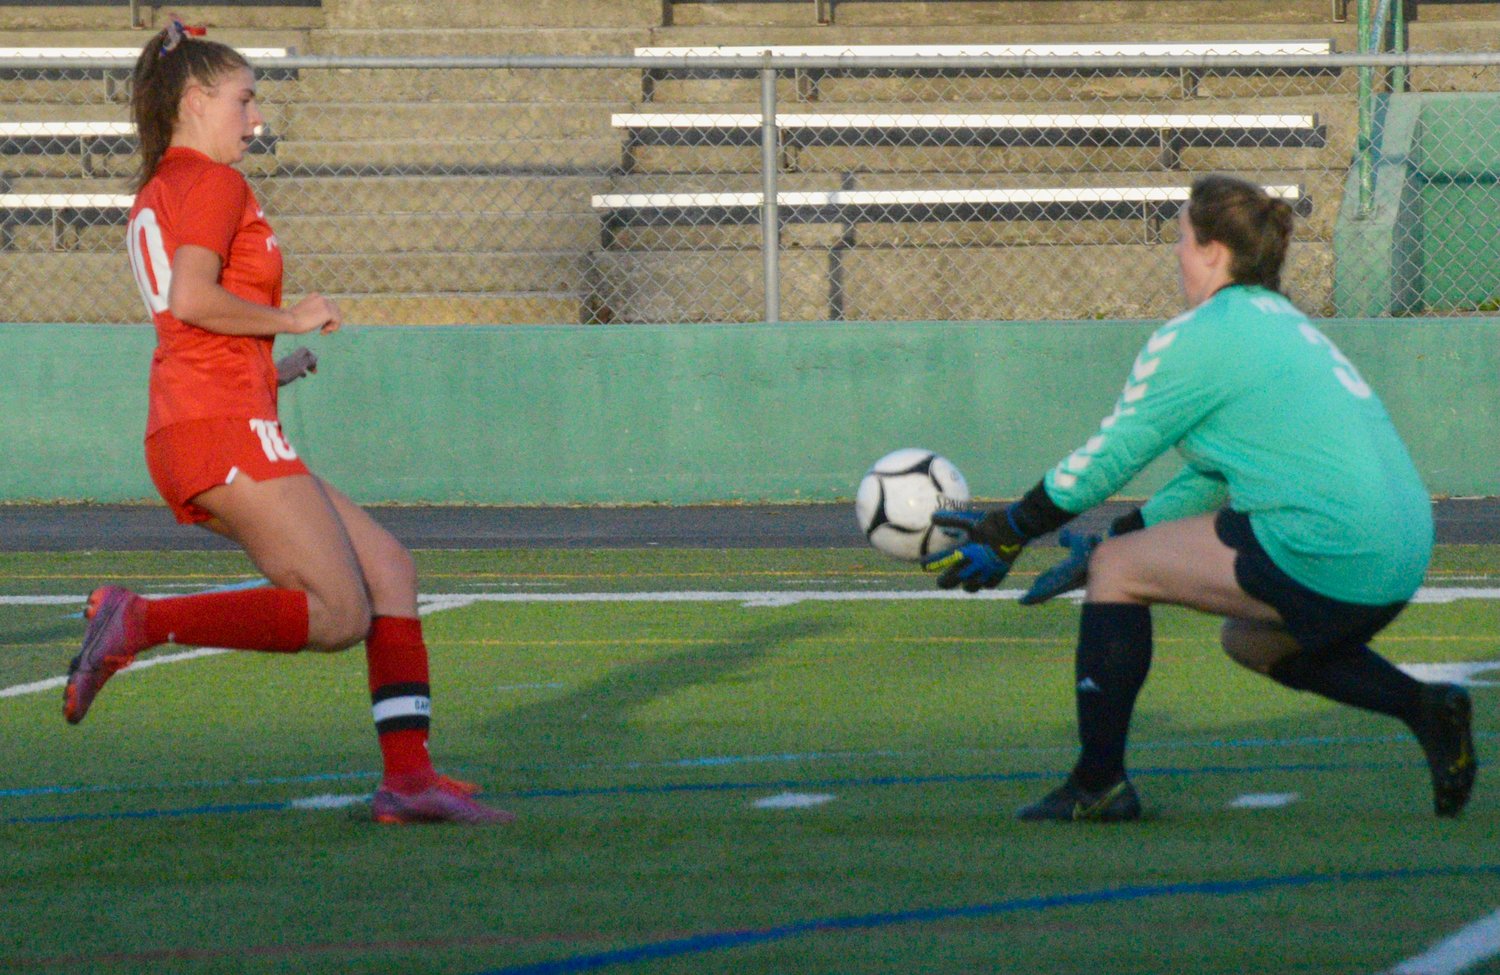 Senior Kaitlin Roche closes in quickly as the Burrillville goaltender comes out of net to make a save.